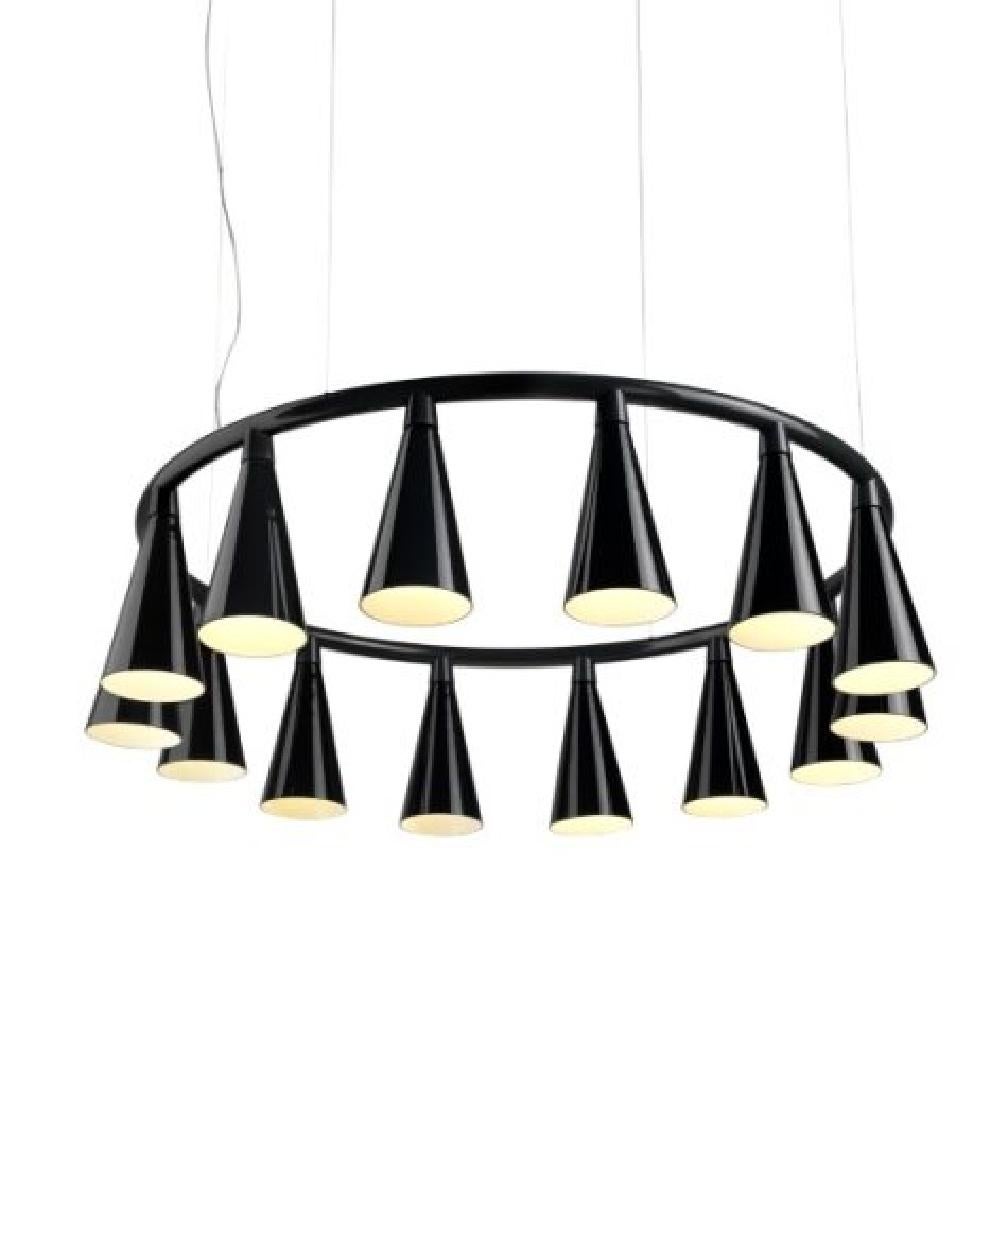 KOMORI Set 01 chandelier by Nendo for Wonderglass In New Condition For Sale In Brooklyn, NY